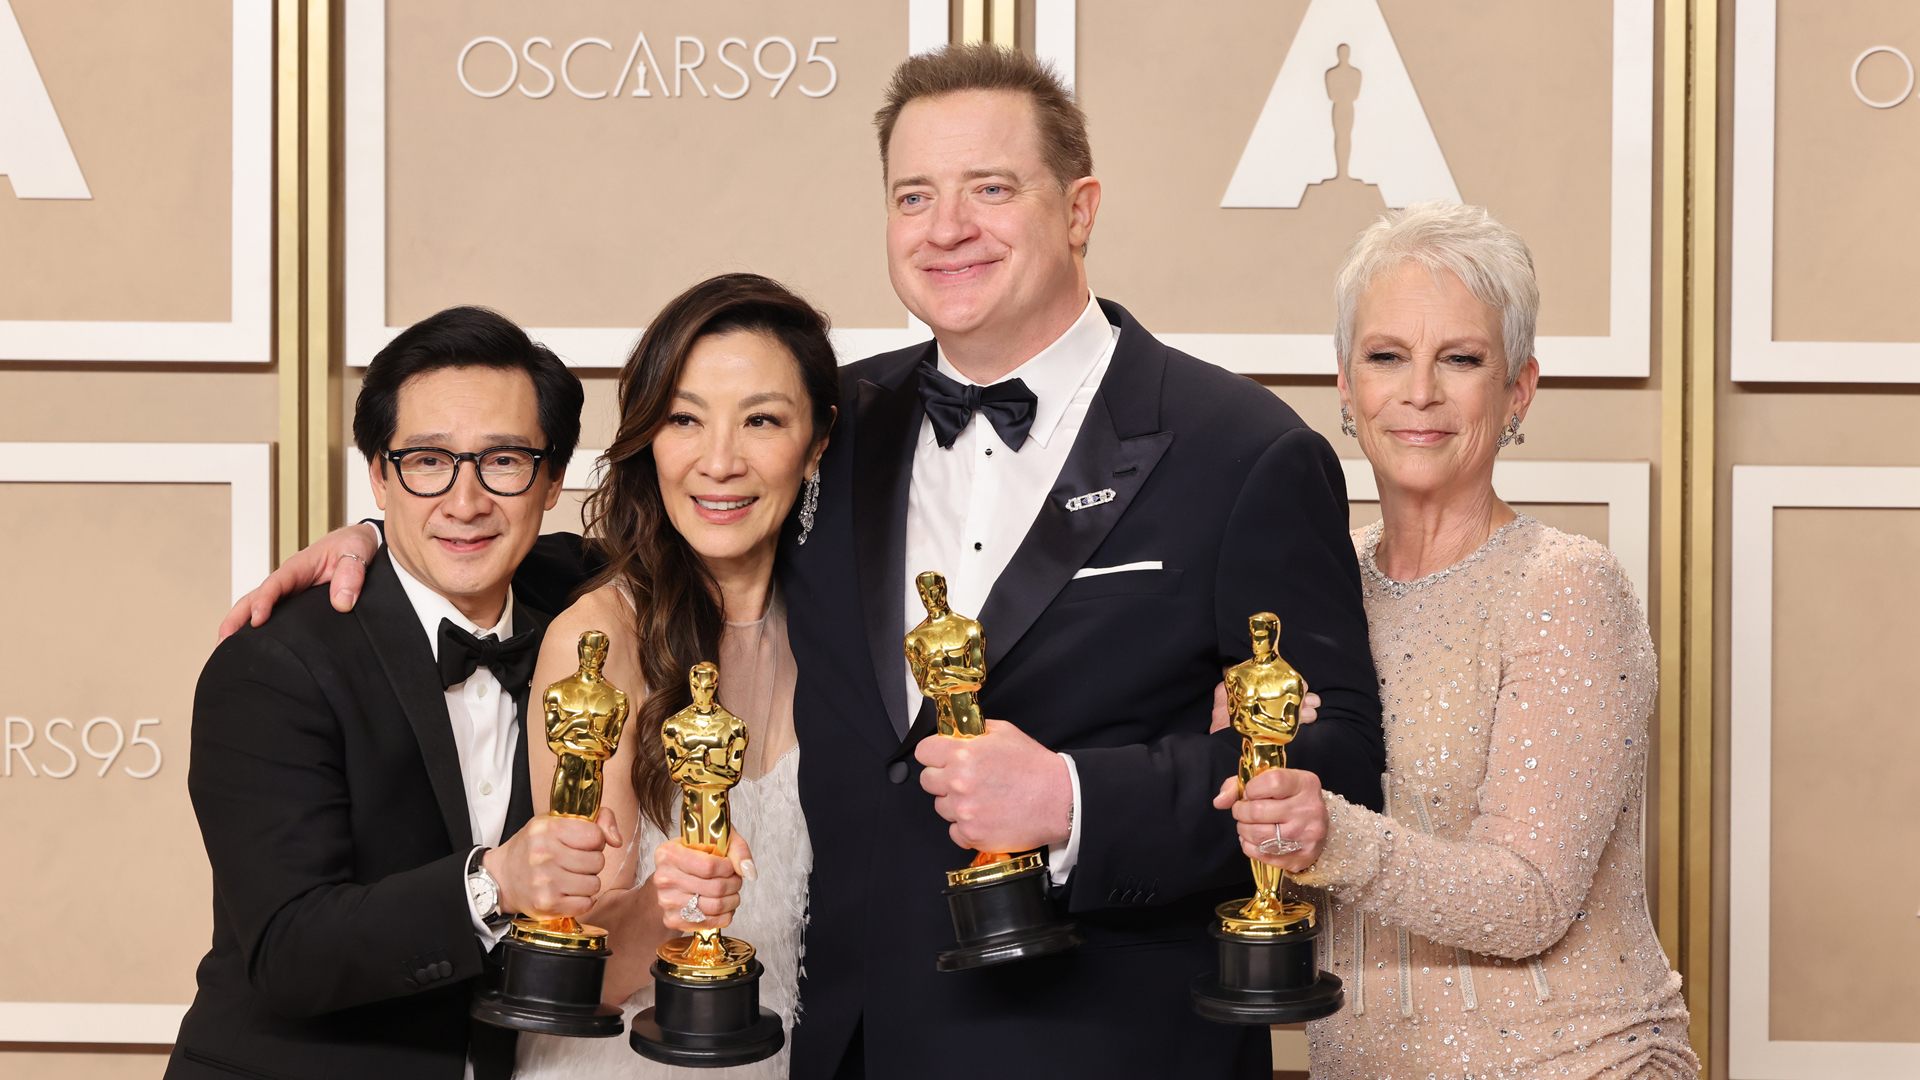 Brendan Fraser, Ke Huy Quan, Michelle Yeoh, and Jamie Lee Curtis pose with their Oscar trophies